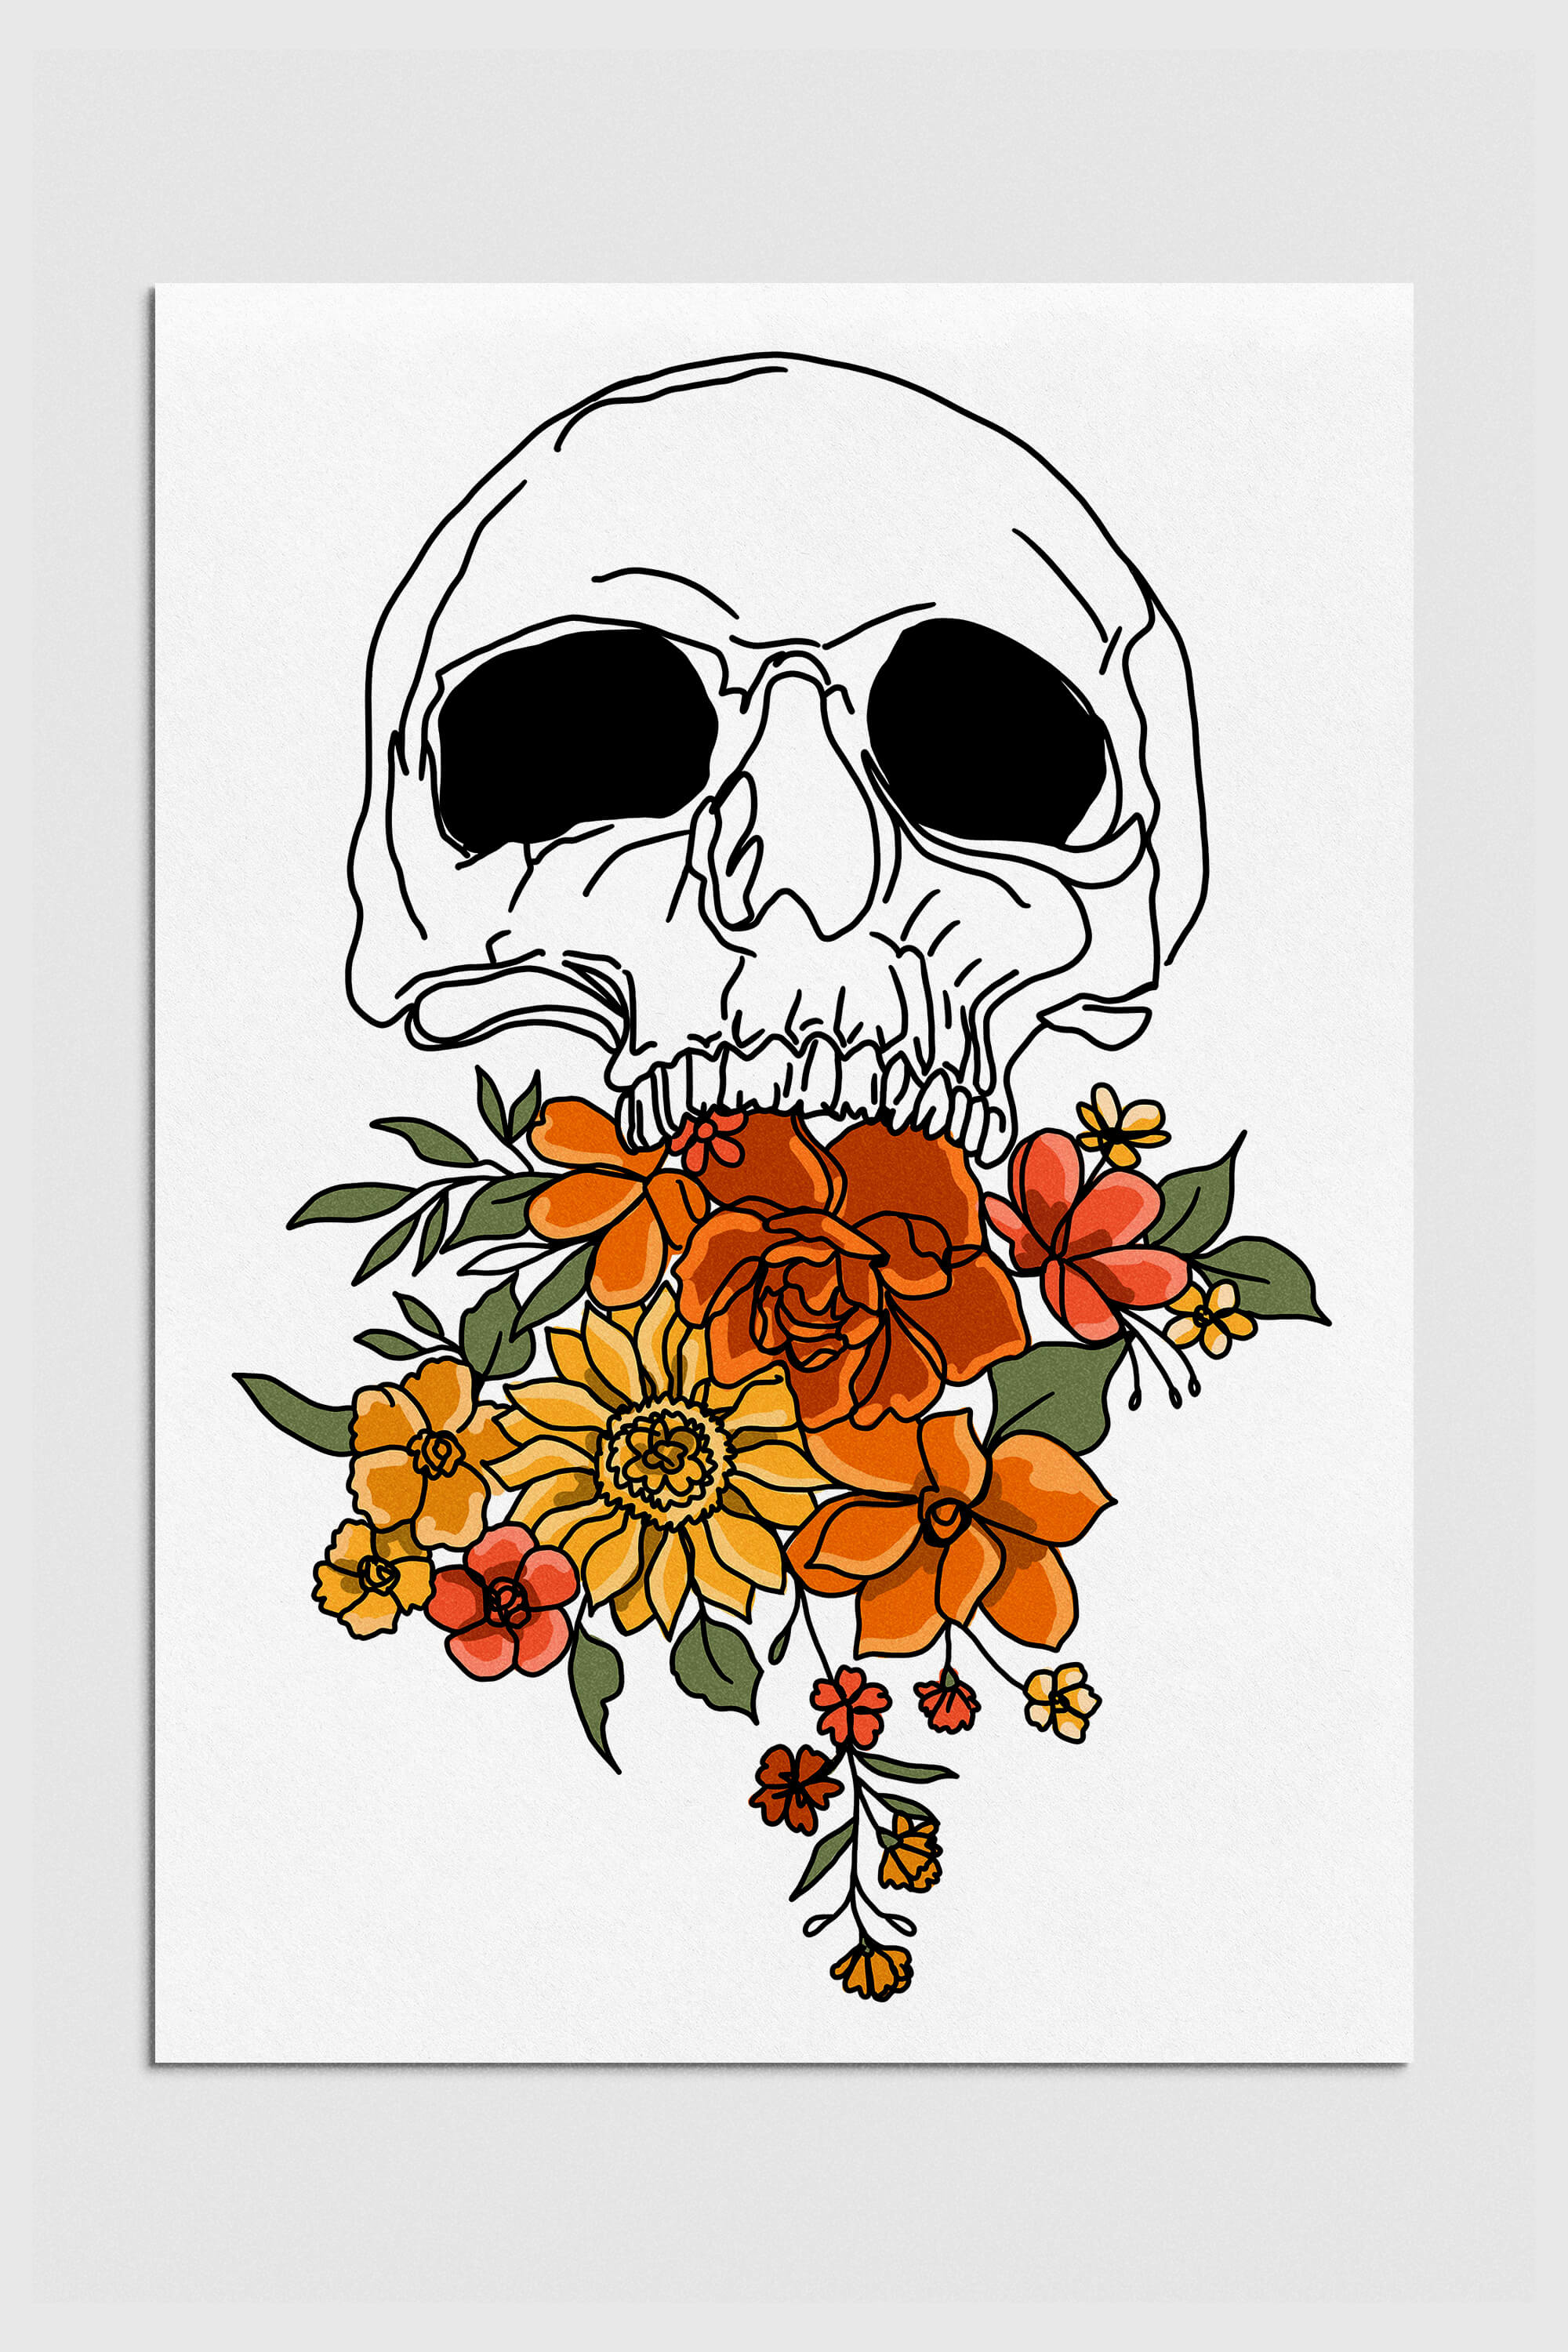 Floral Skull Artwork blending Gothic and abstract styles, perfect for unique home wall decor.